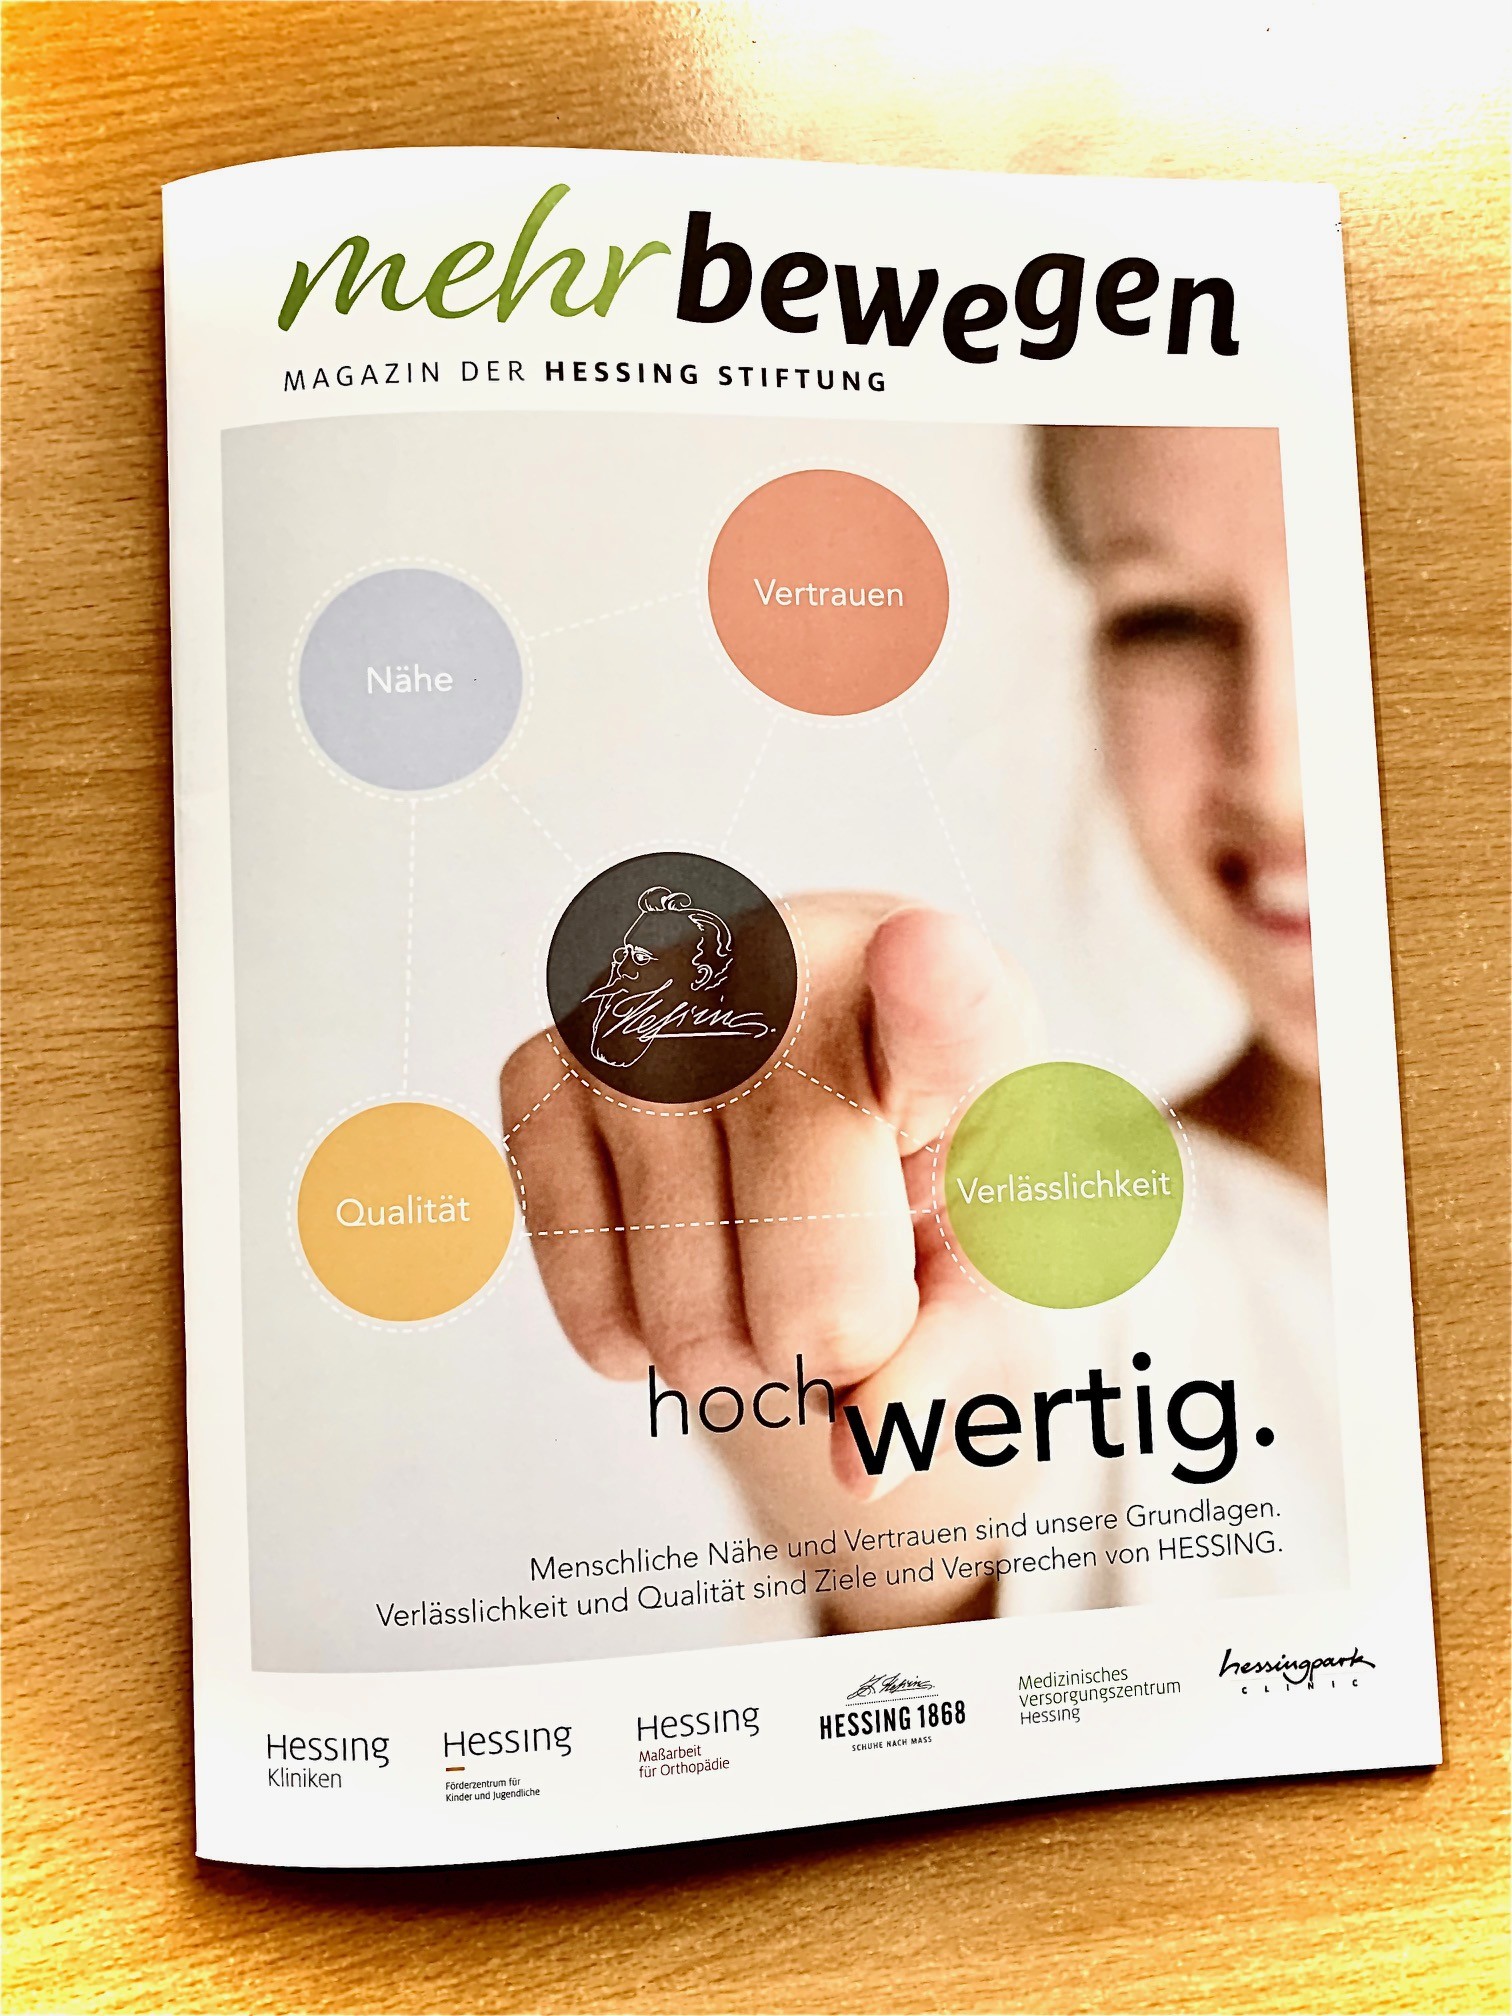 Hessing Stiftung Magazin Outline-Online Medien GmbH